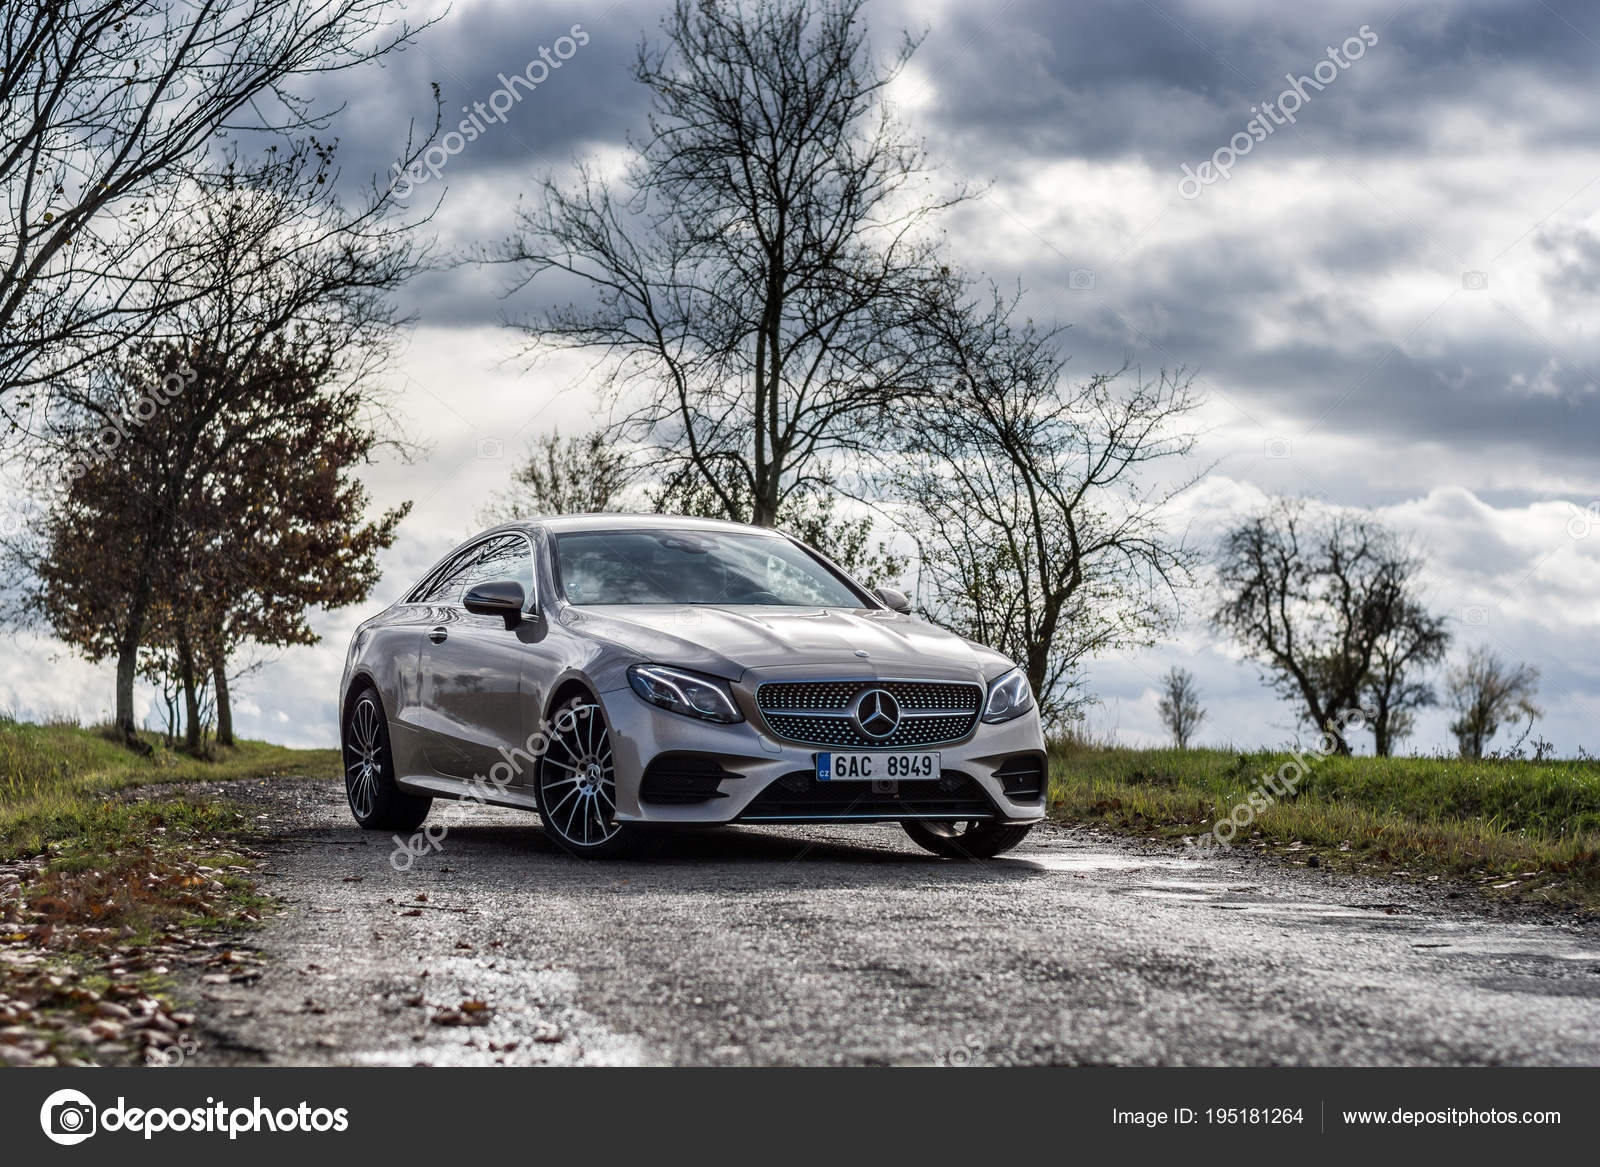 New Mercedes Benz 00 Coupe Model Year 18 Czech Road Stock Editorial Photo C Tomasdevera